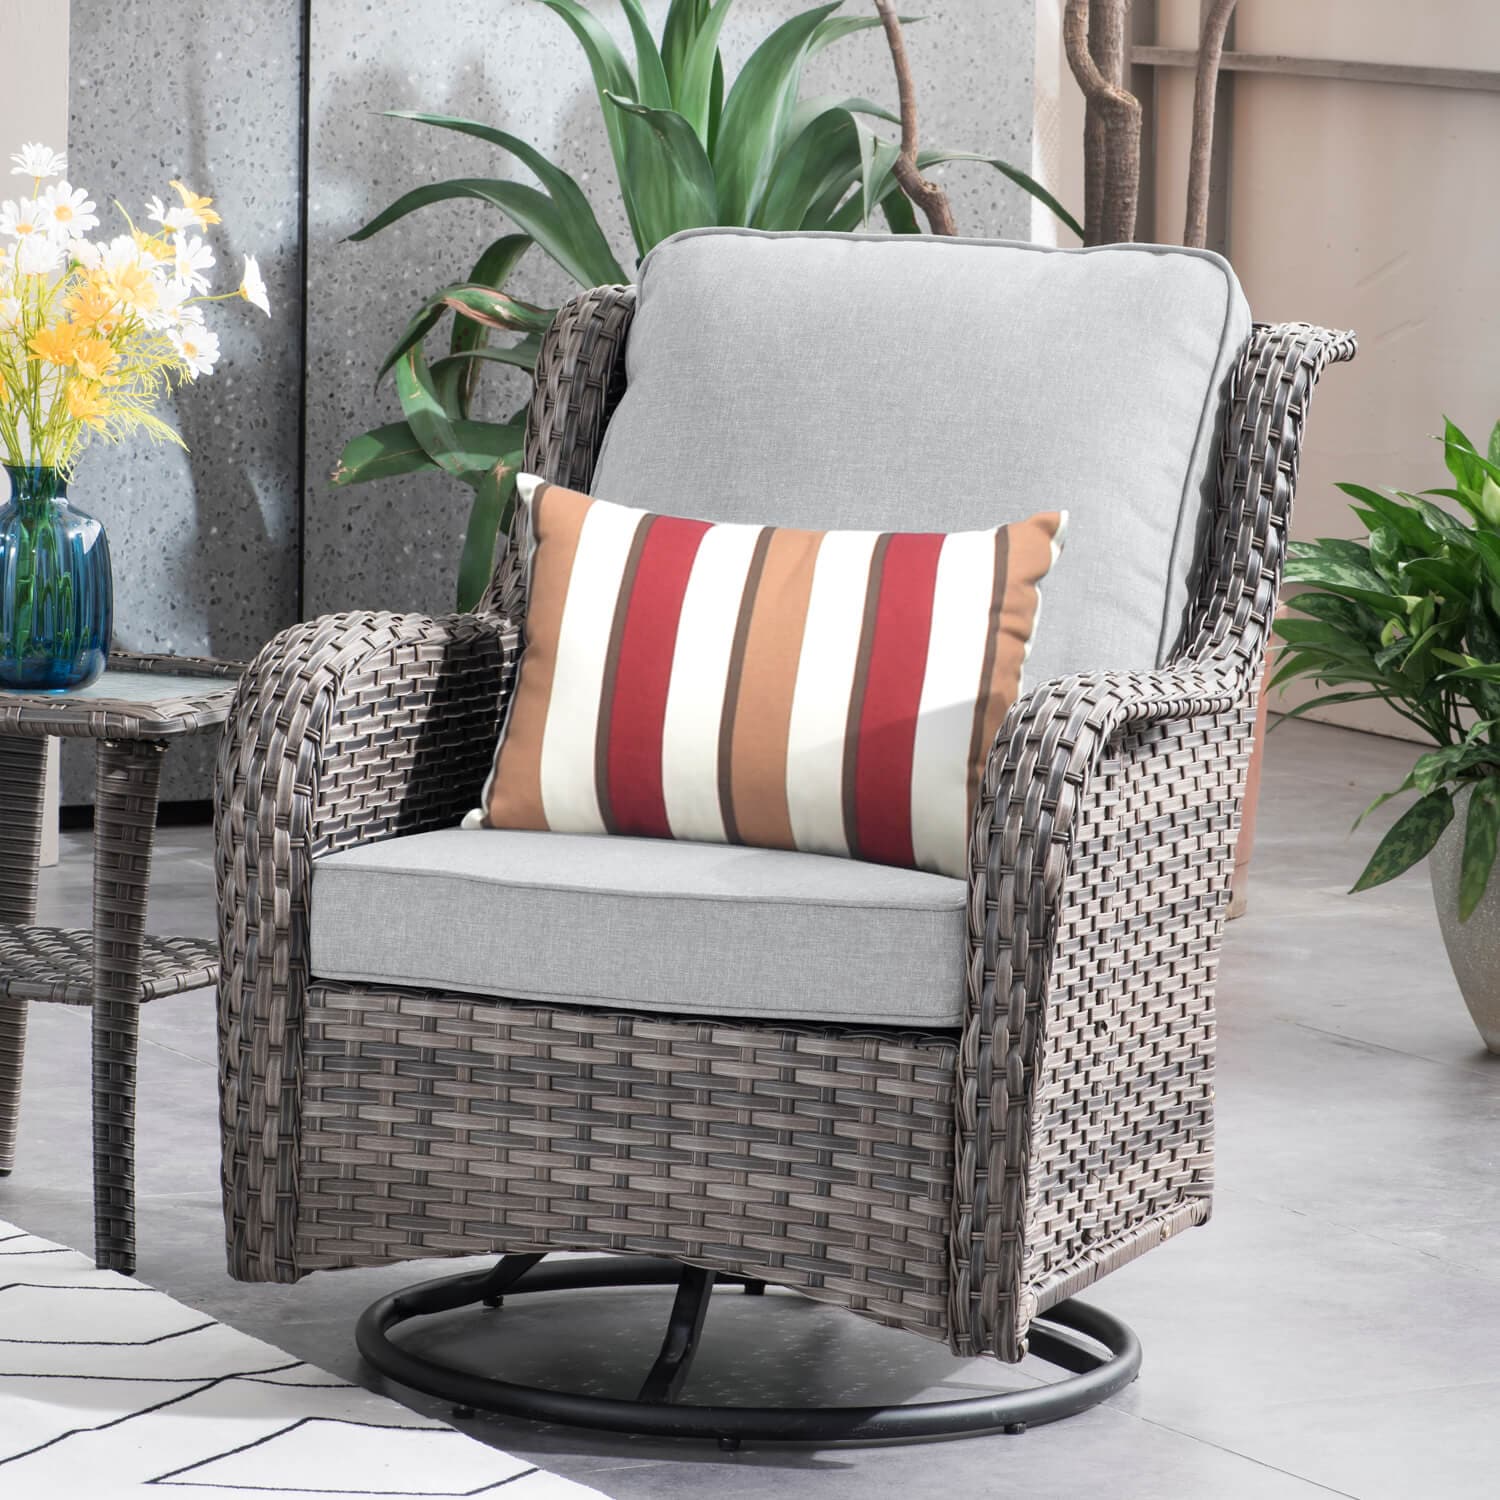 Ovios Patio Conversation Set 7-Piece with Swivel Chairs and Table Kenard